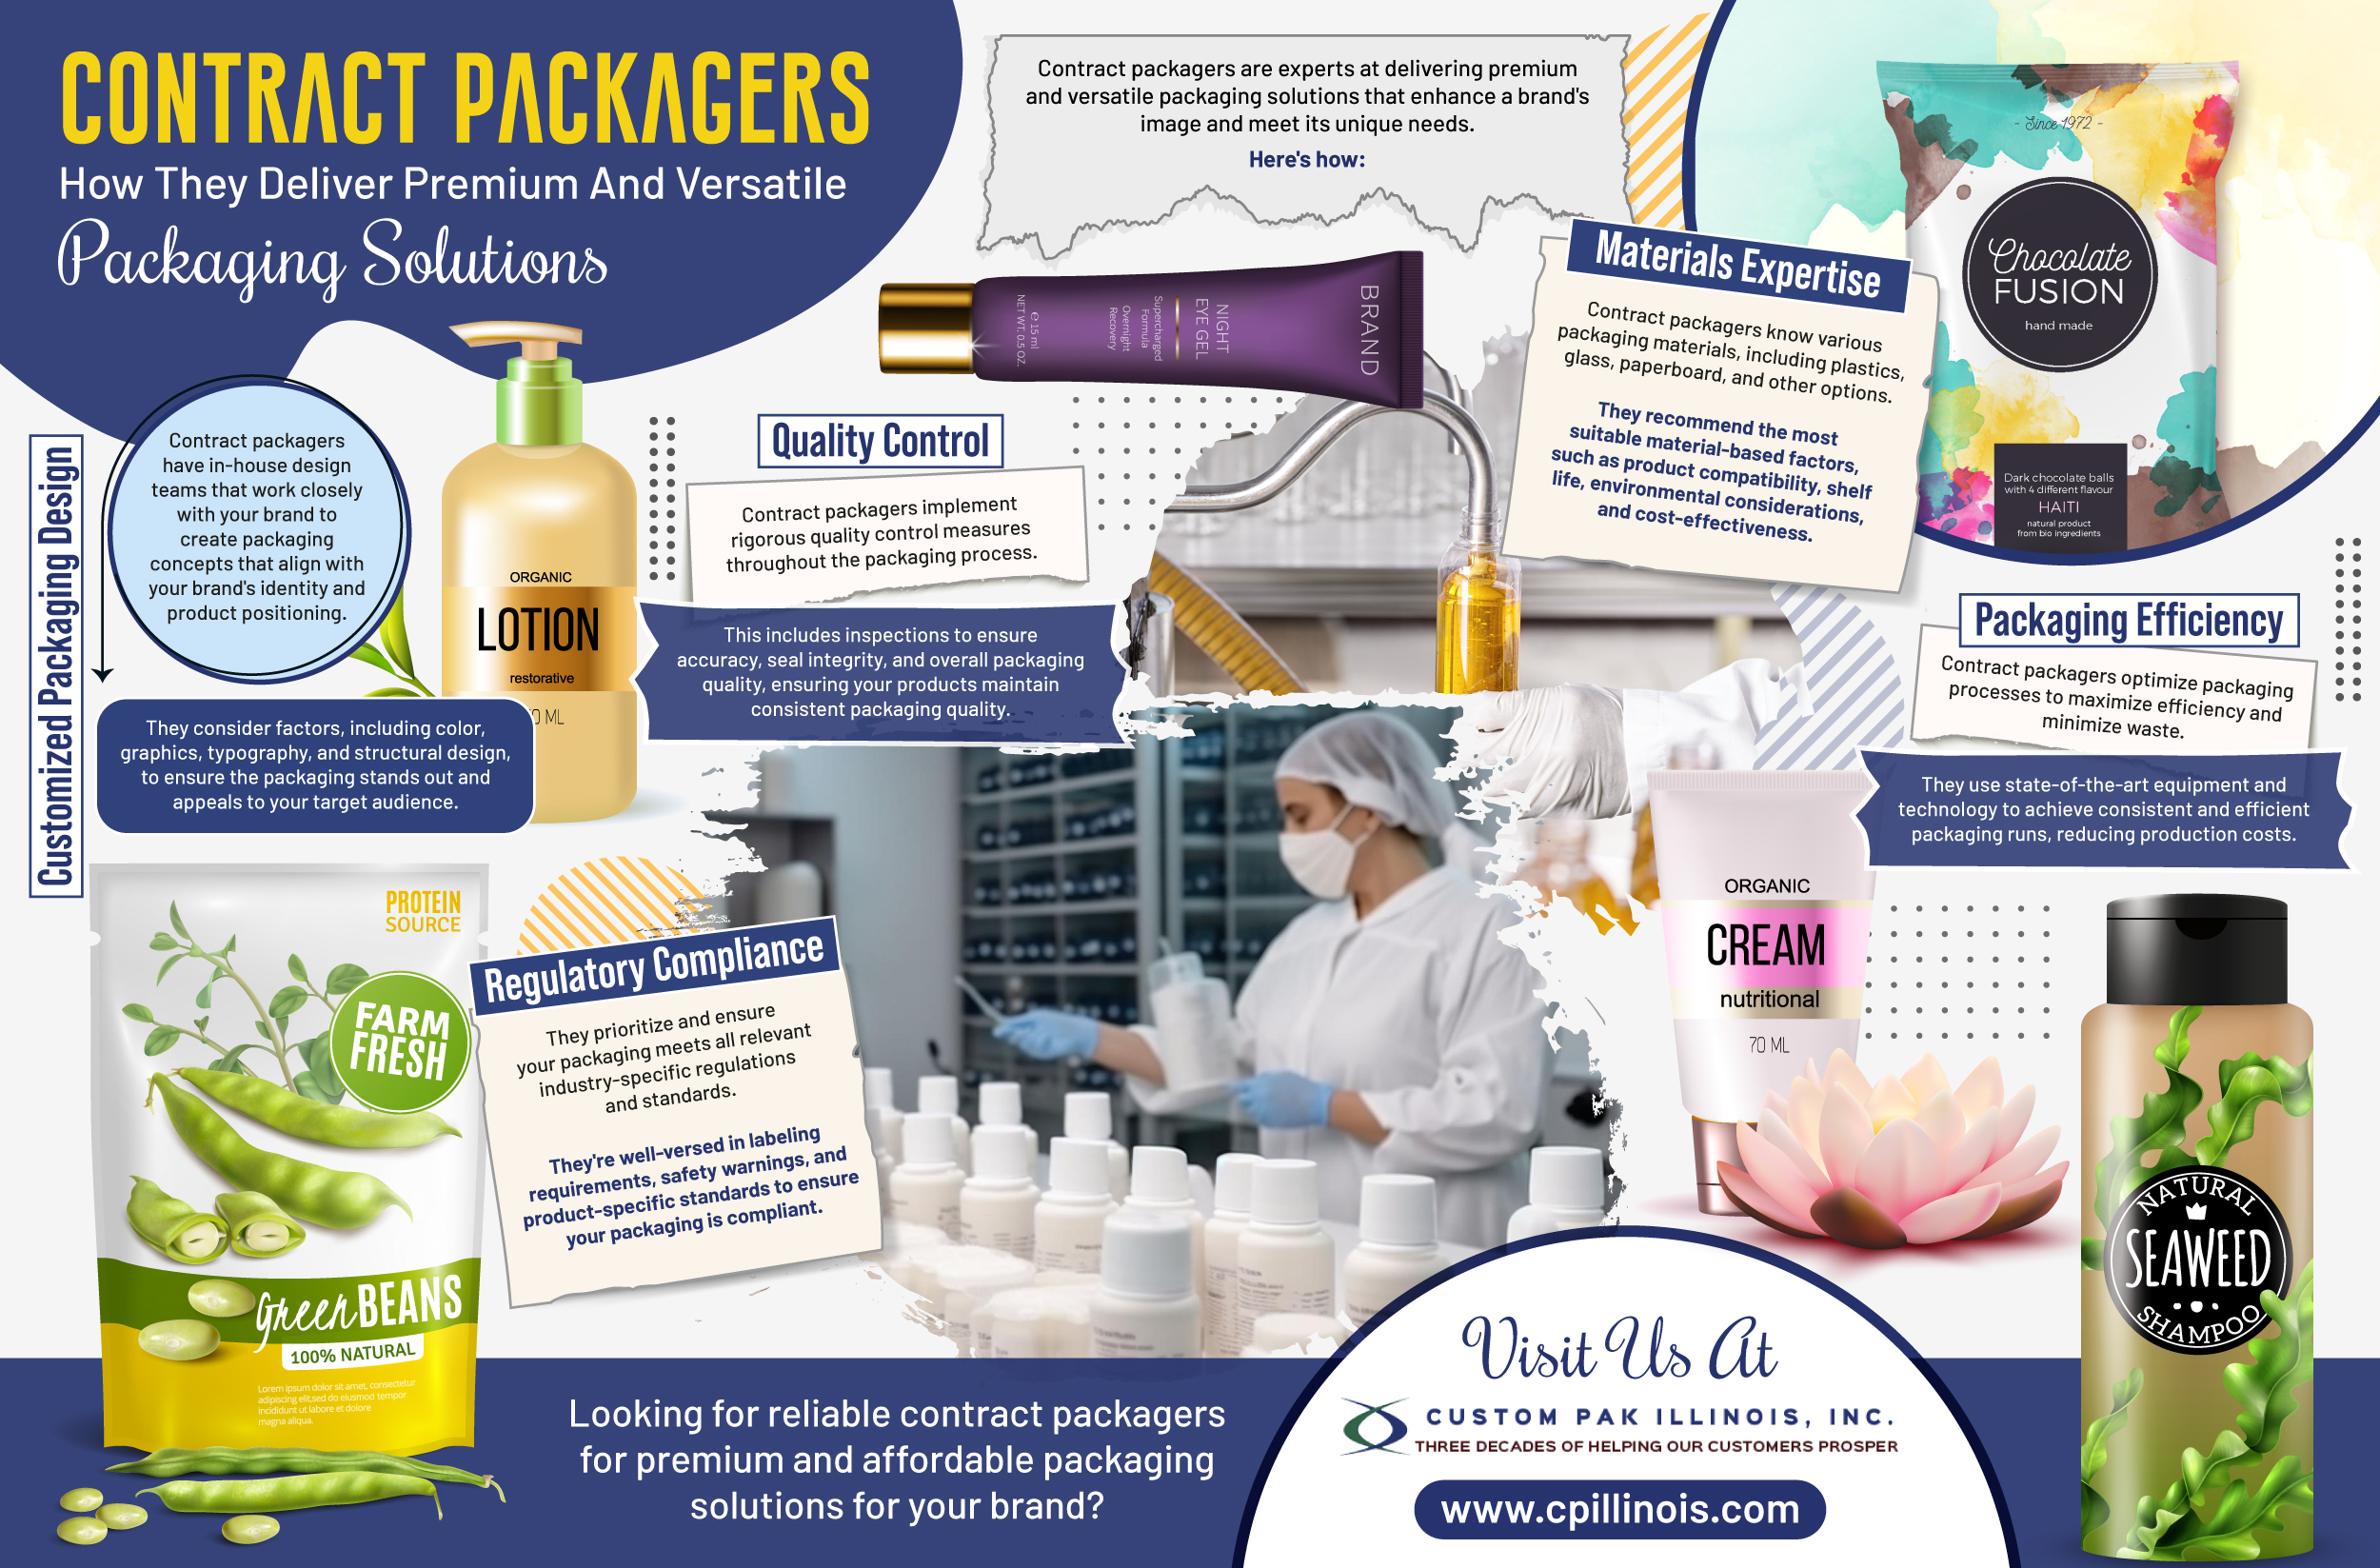 Contract Packagers: How They Deliver Premium And Versatile Packaging Solutions